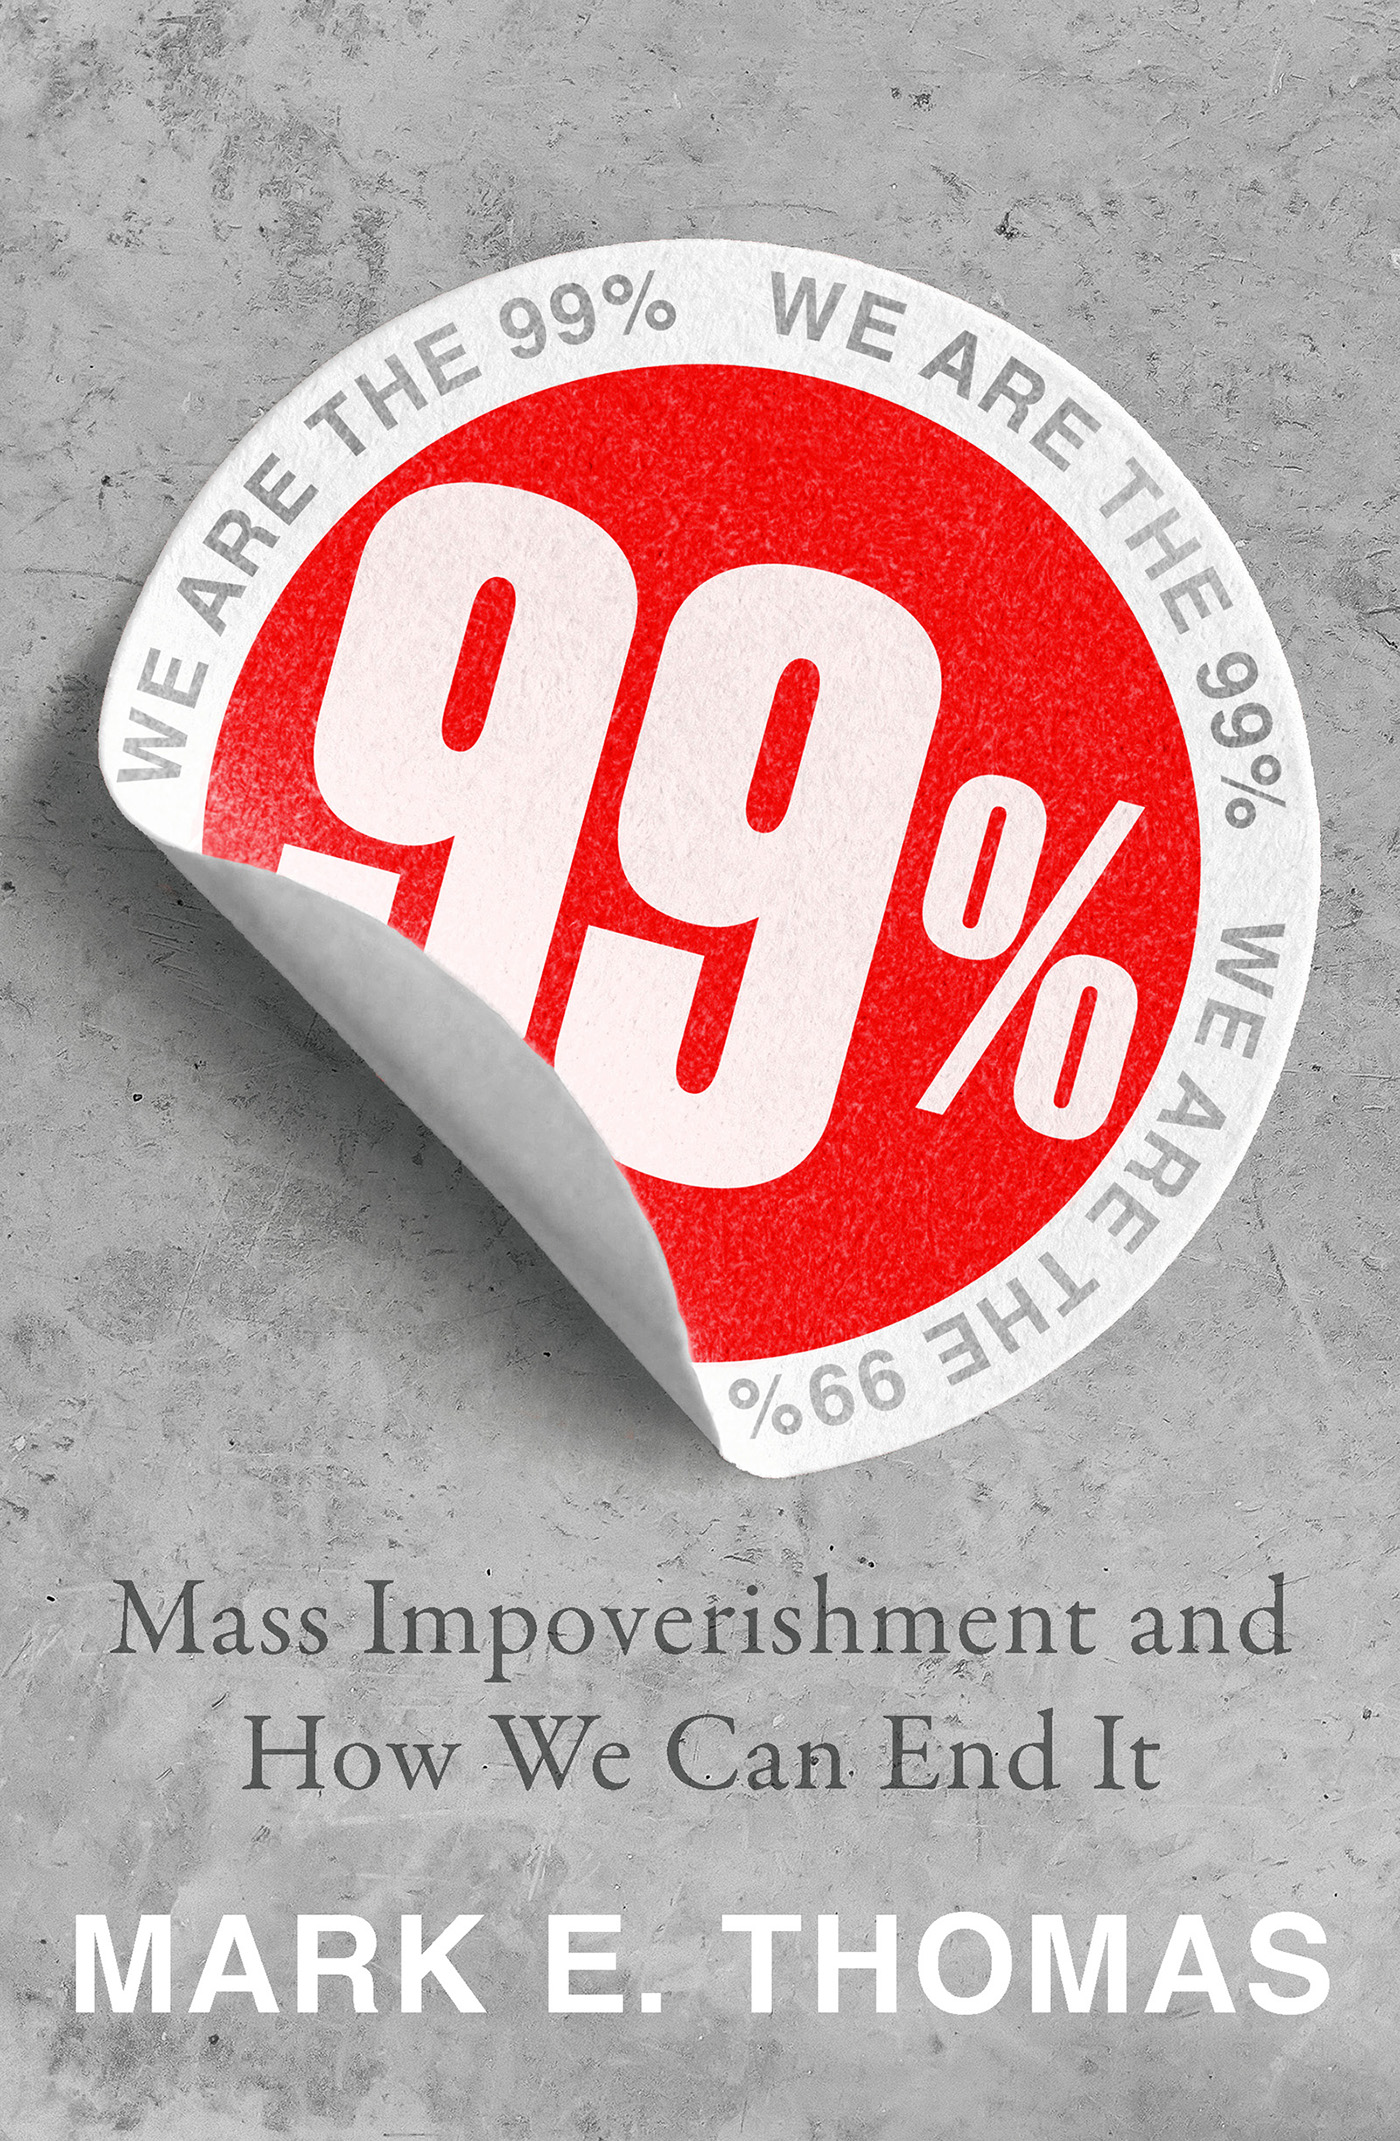 99% - Mass Impoverishment and How We Can End It